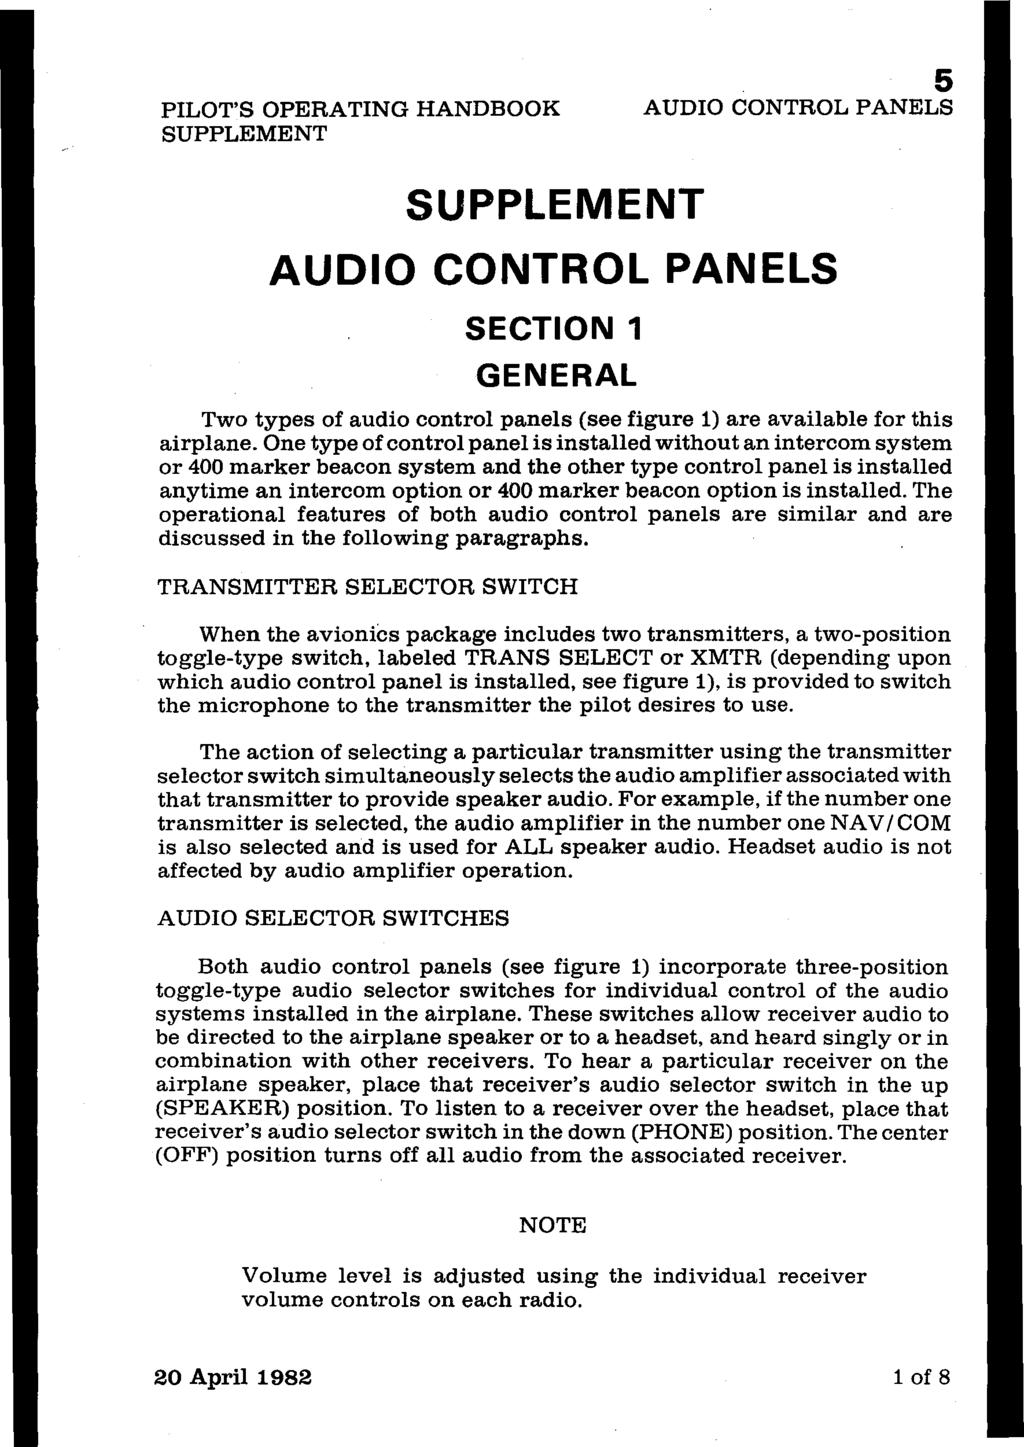 PILOT'S OPERATING HANDBOOK SUPPLEMENT 5 AUDIO CONTROL PANELS SUPPLEMENT AUDIO CONTROL PANELS SECTION 1 GENERAL Two types of audio control panels (see figure 1) are available for this airplane.